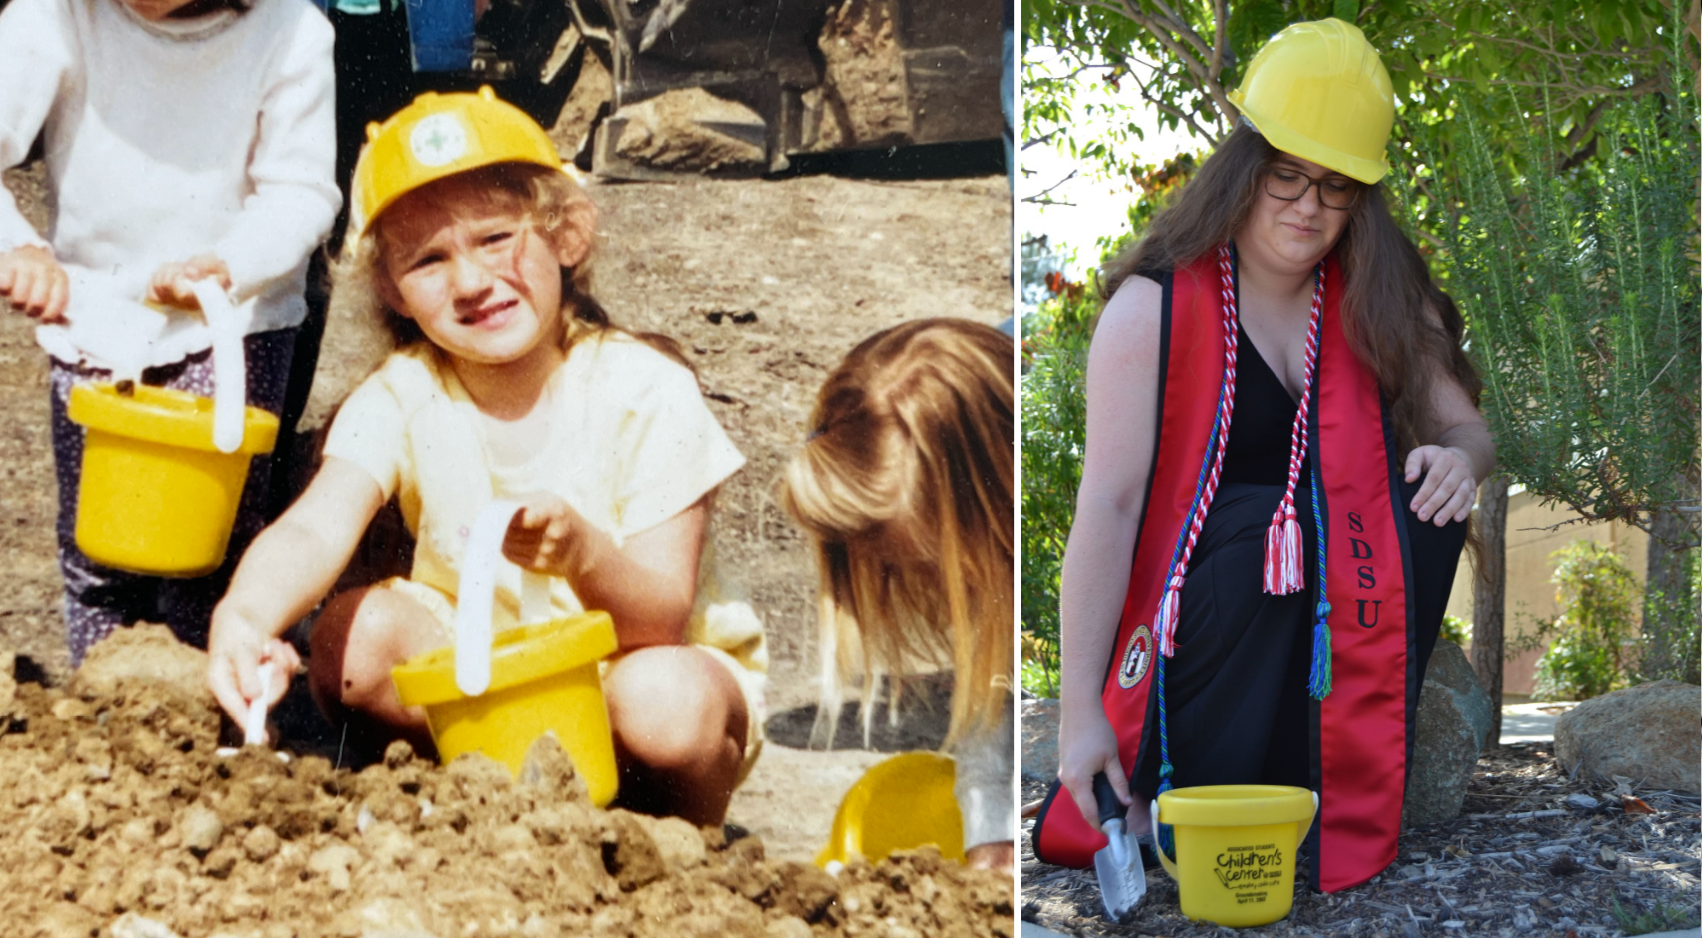 Abby Castro as a child at the groundbreaking for the relocated Children's Center and later recreating the photo as part of her undergraduate graduation photos. (Courtesy photos)